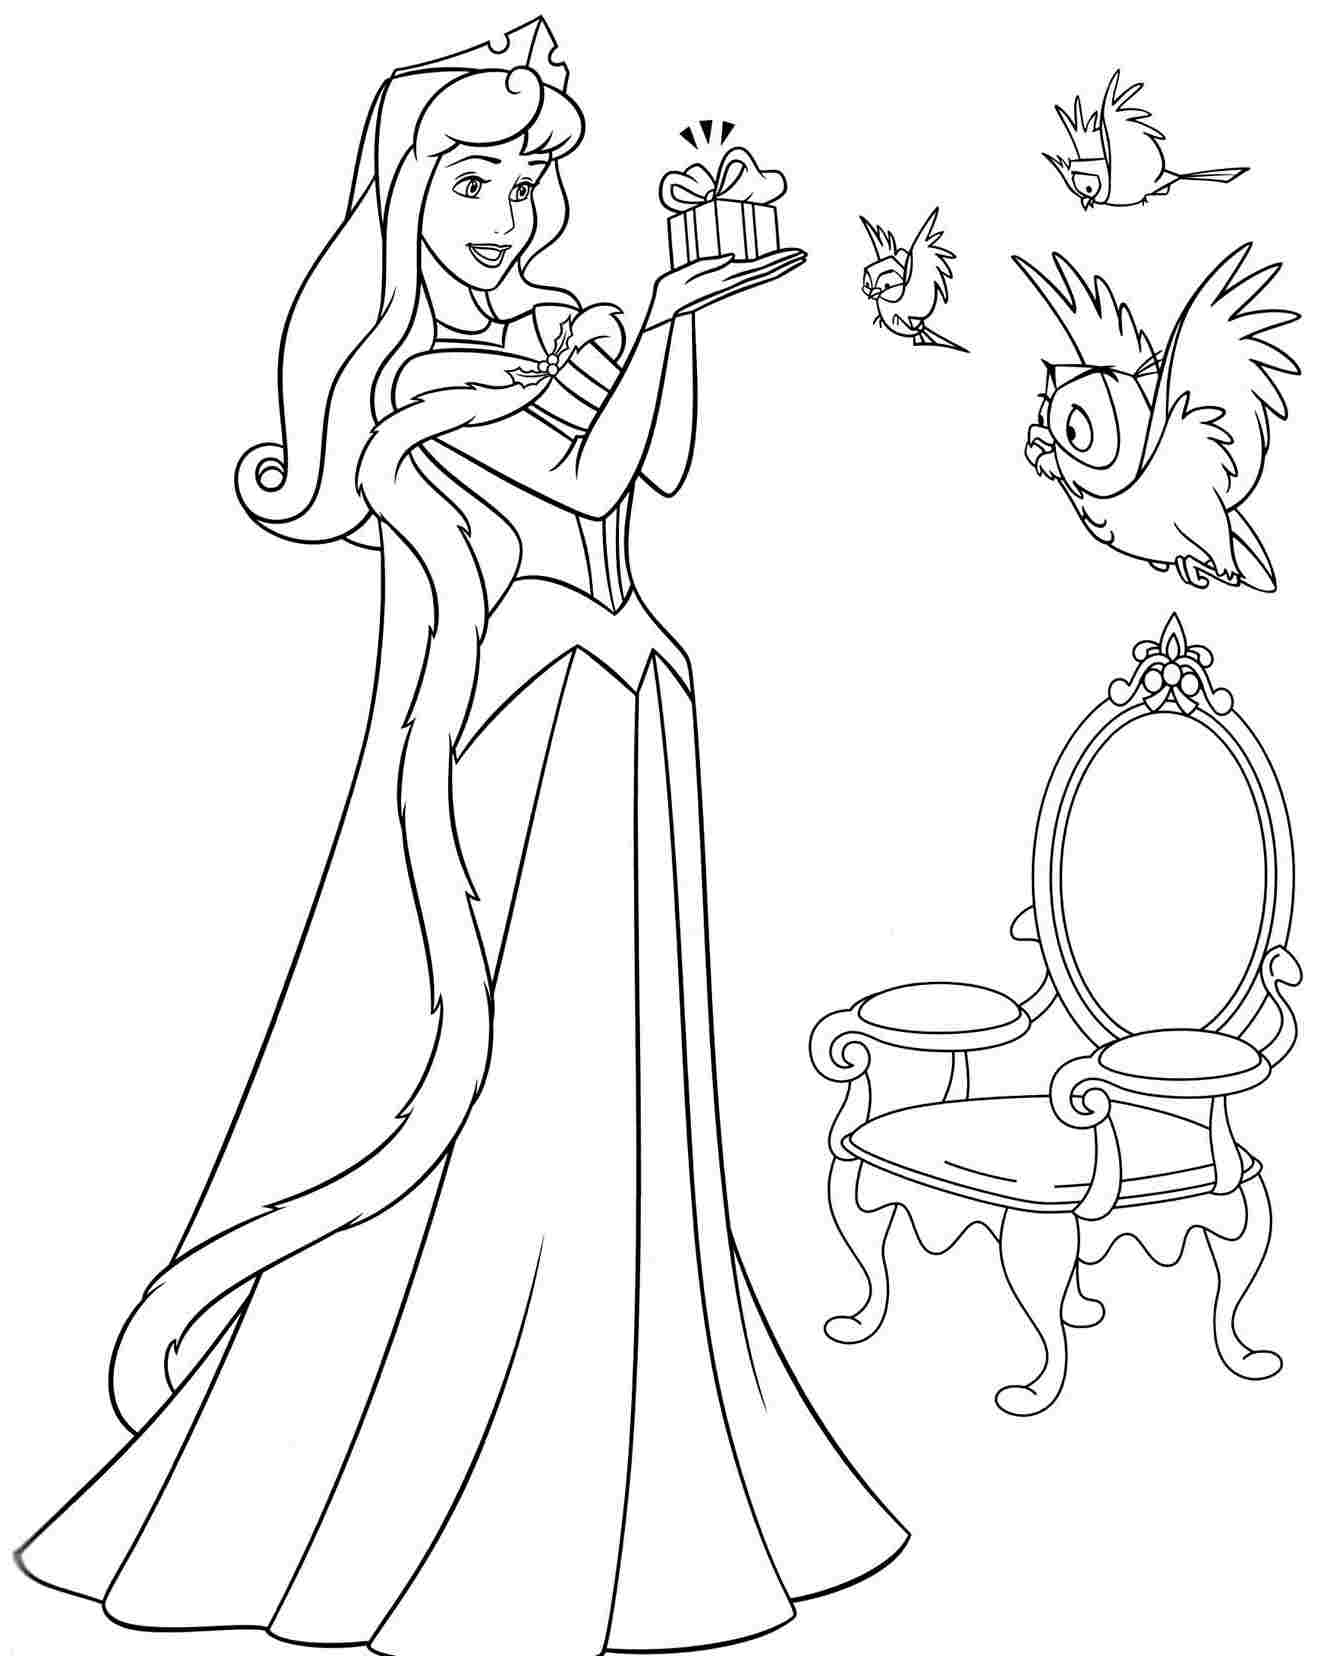 Aurora Coloring Pages Free   High Quality Coloring Pages ...